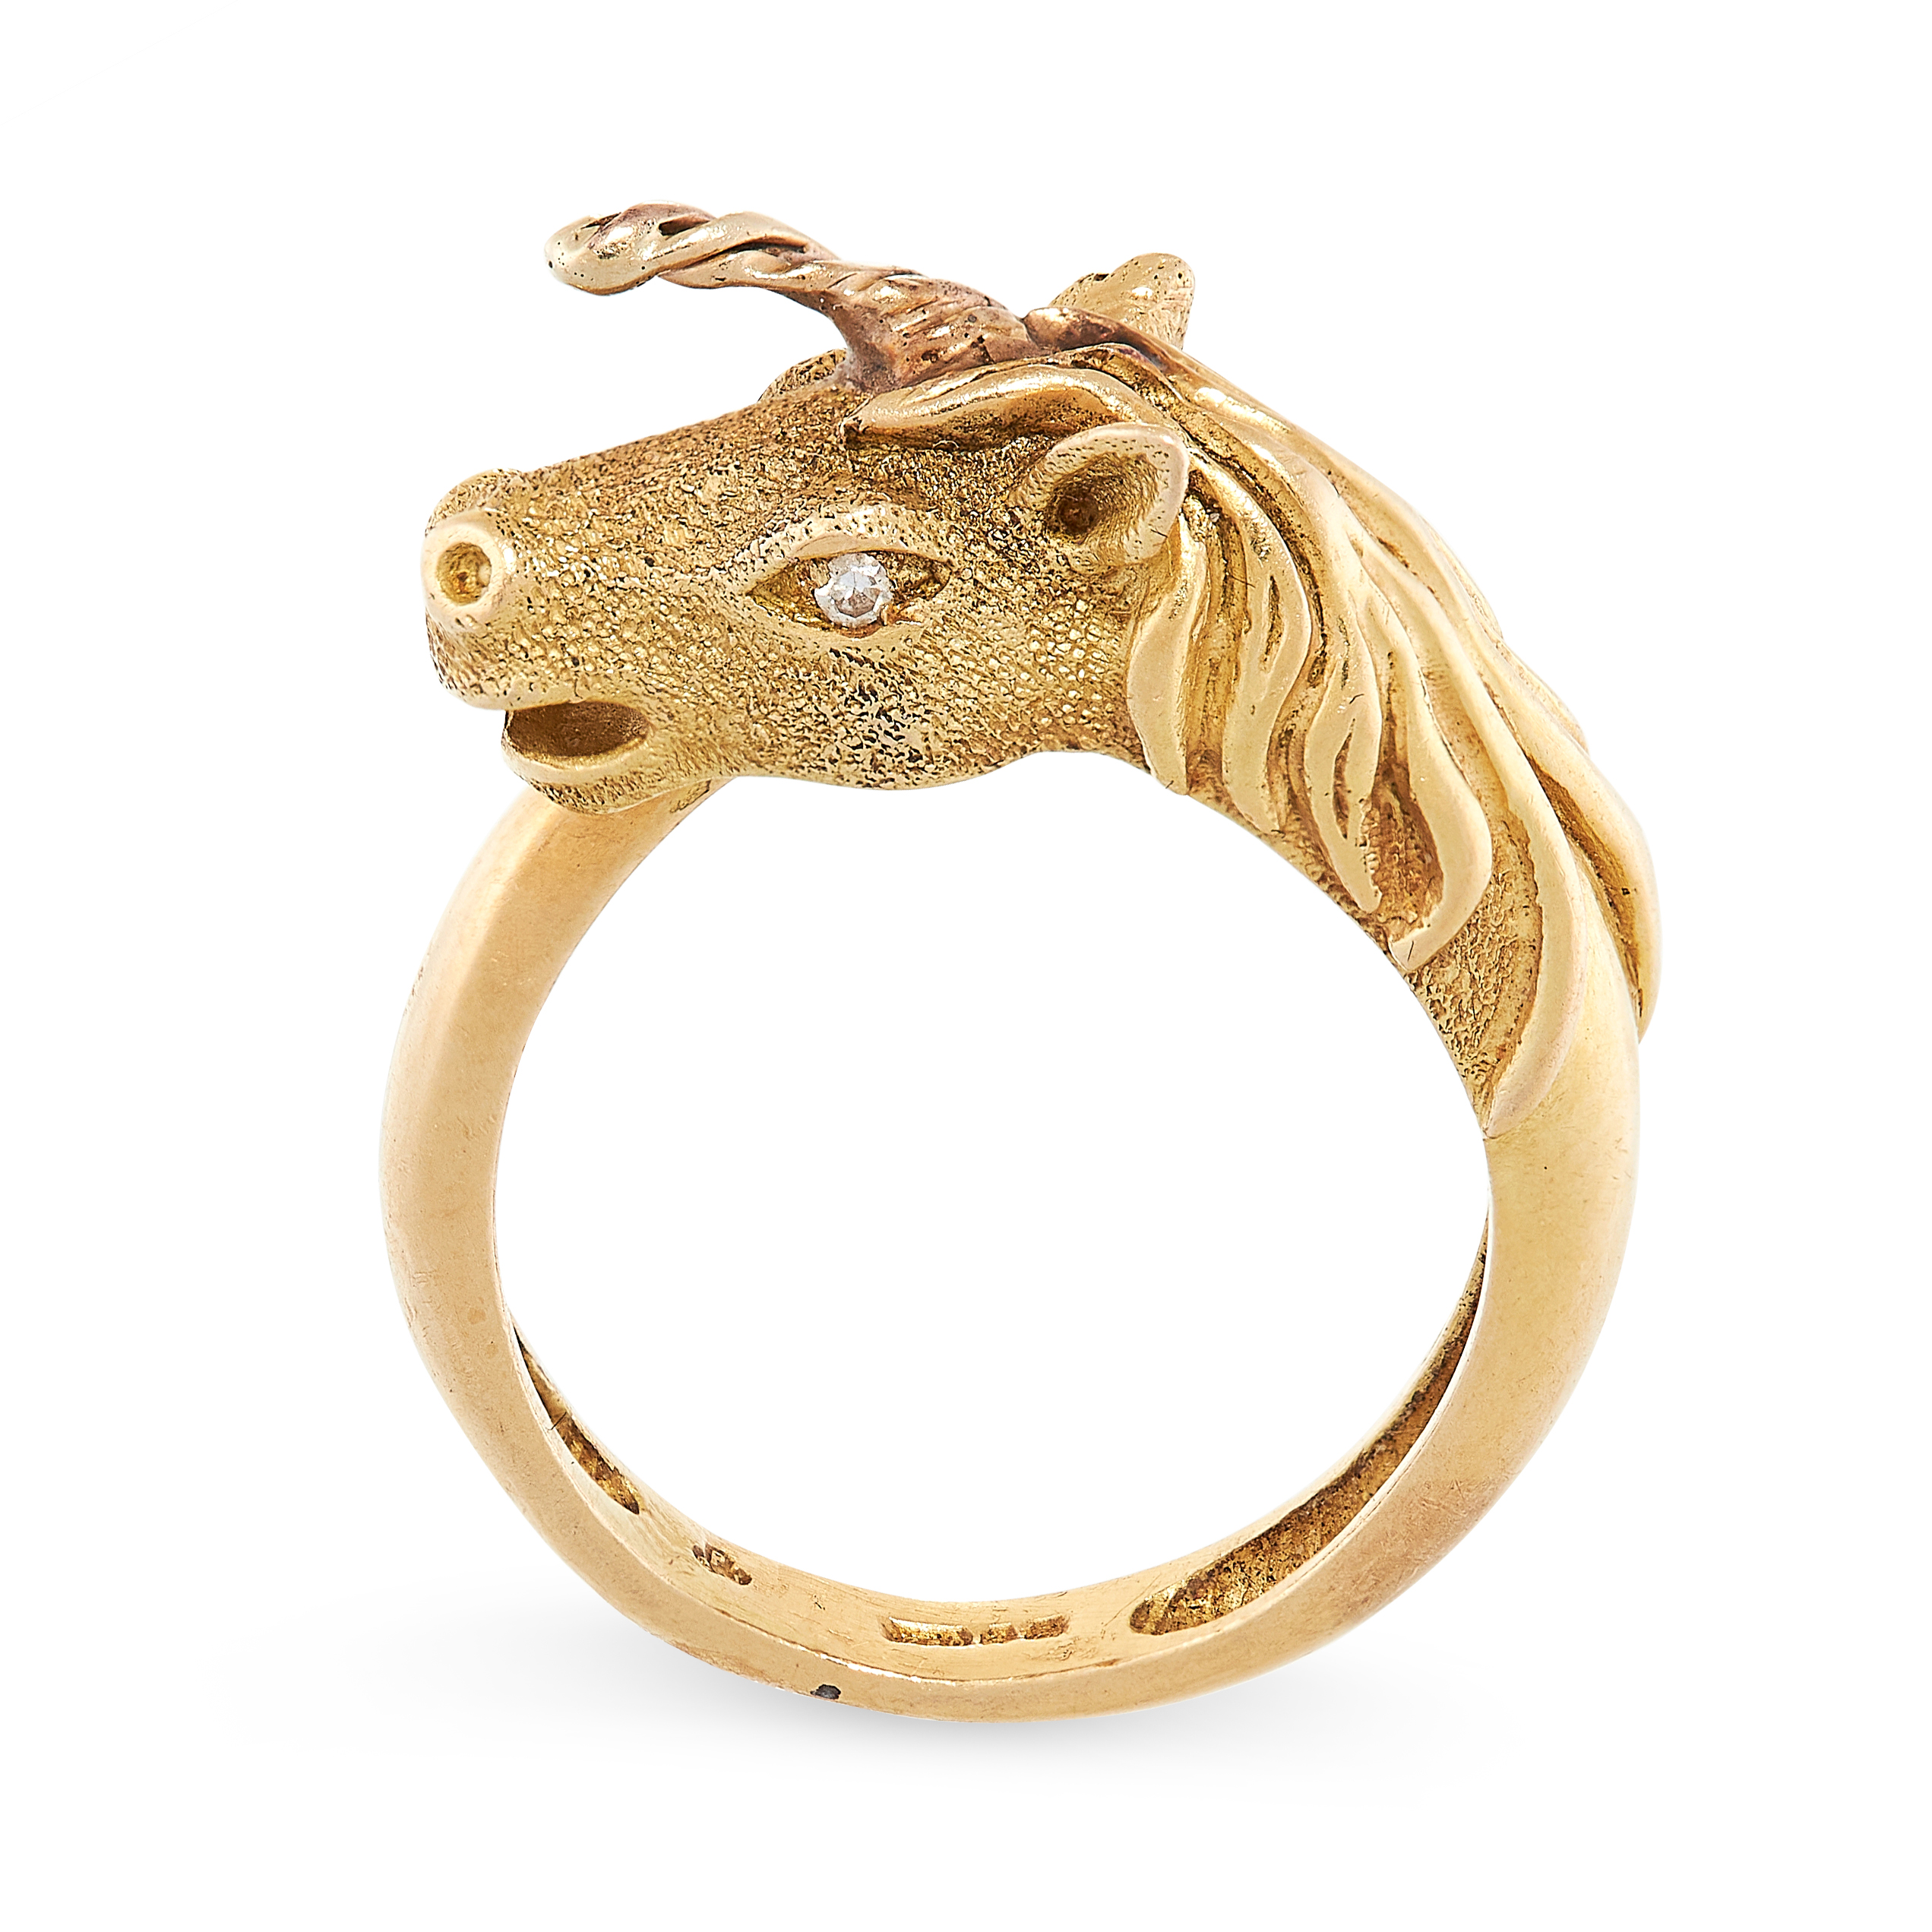 VINTAGE DIAMOND UNICORN DRESS RING mounted in 18ct yellow gold, designed as a unicorn coiled